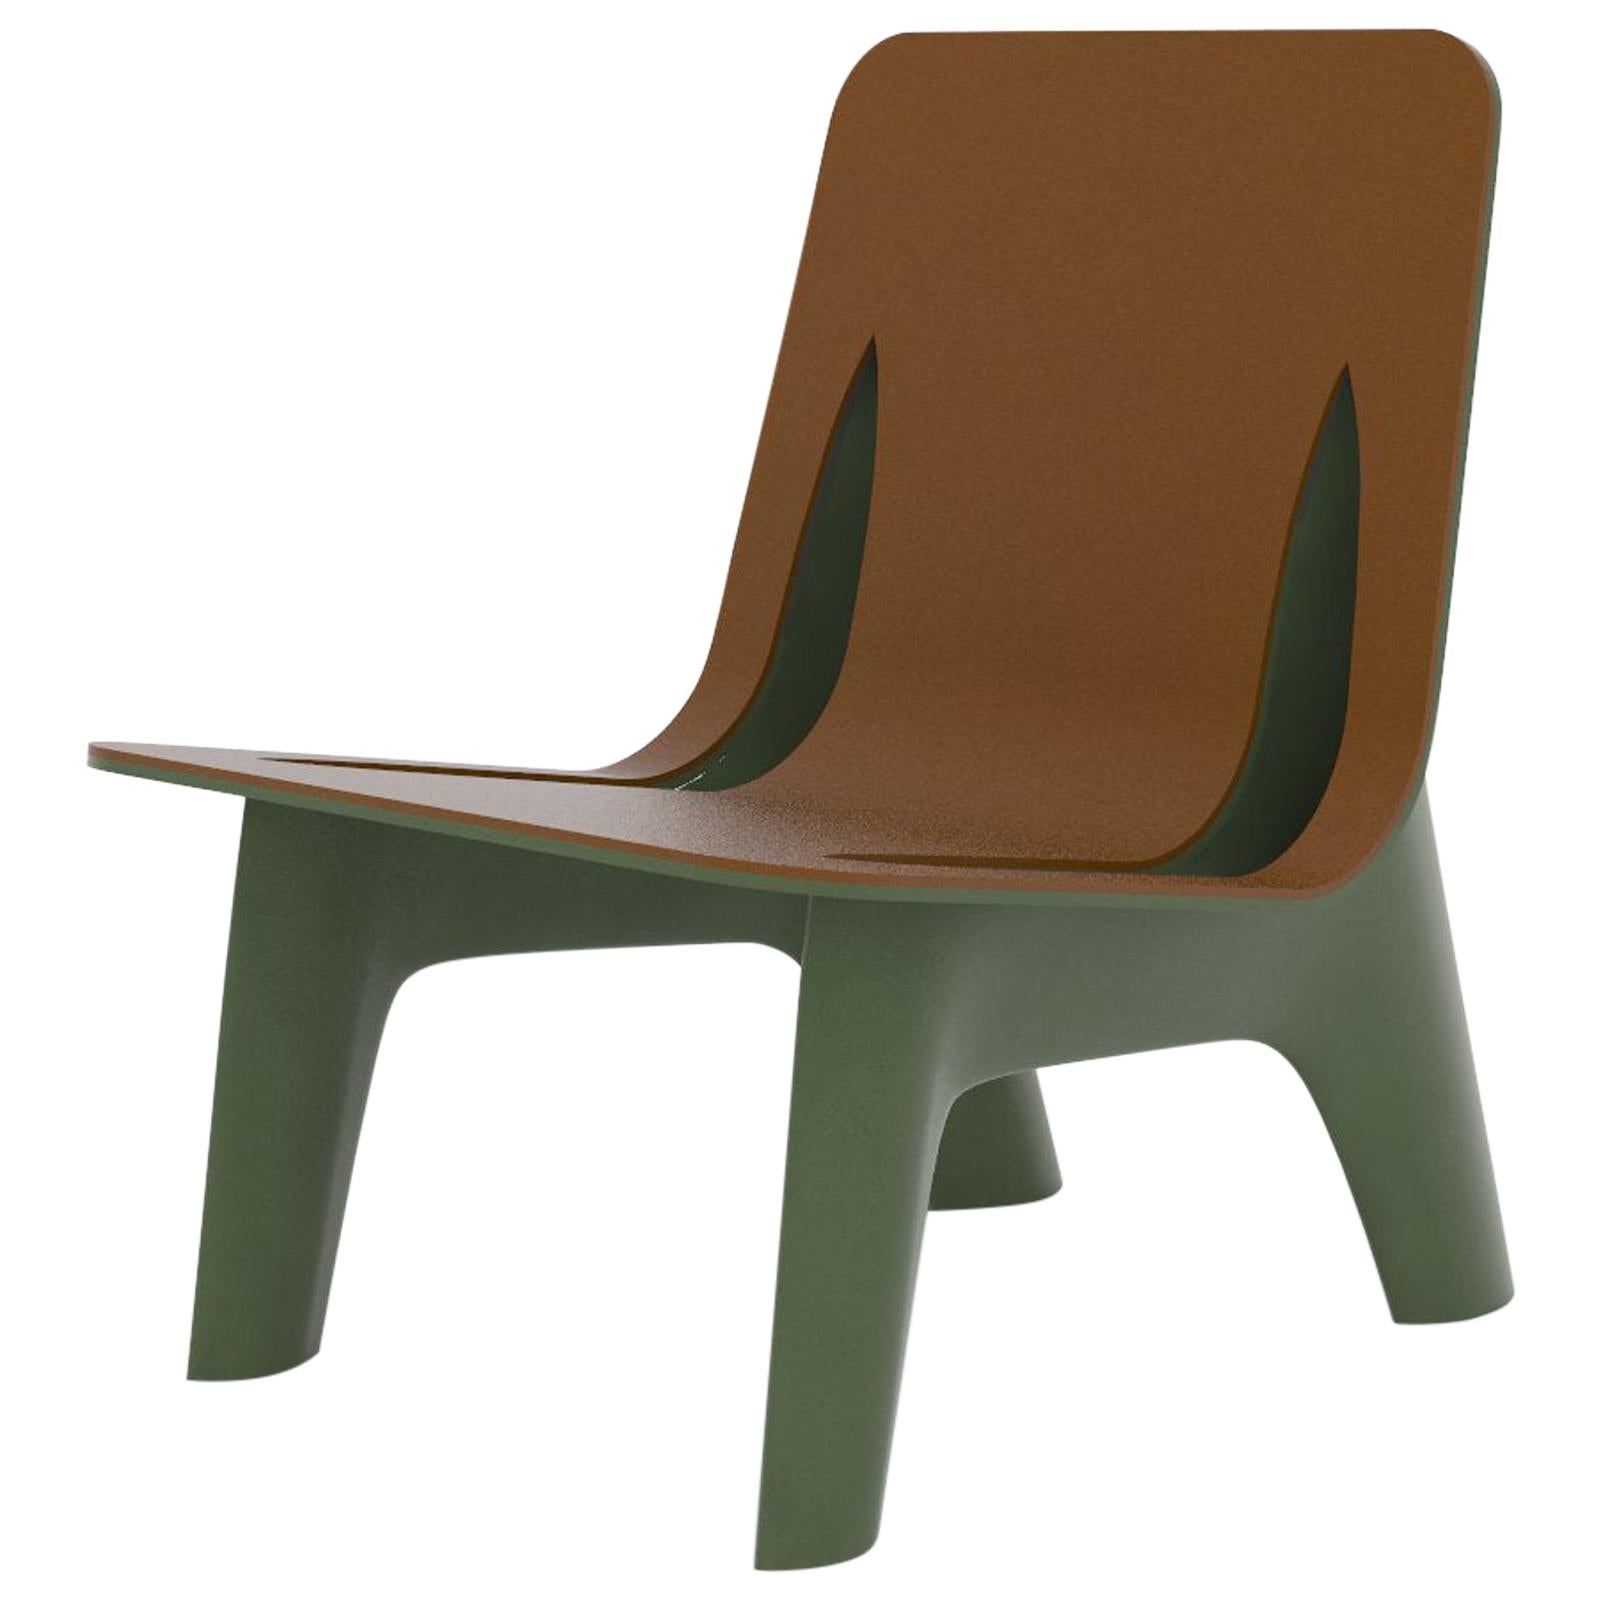 J-Chair Lounge Polished Olive Green Color Aluminum and Leather Seating by Zieta